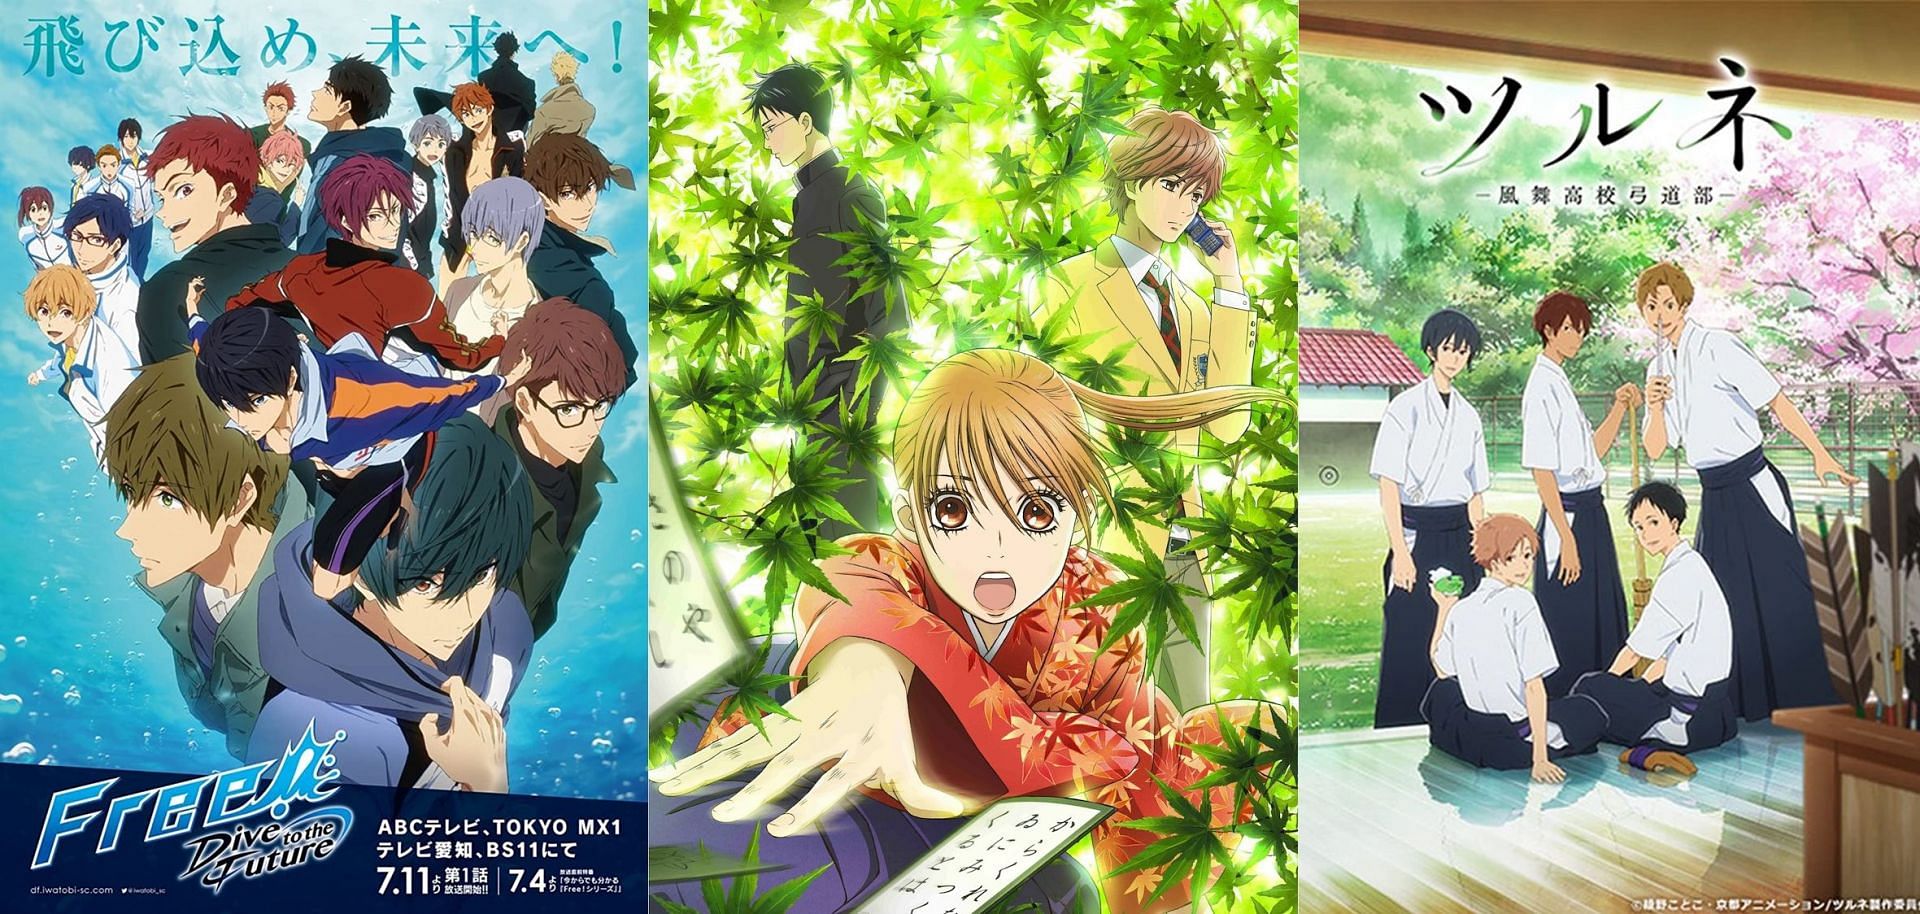 9 sports anime series that everyone can enjoy